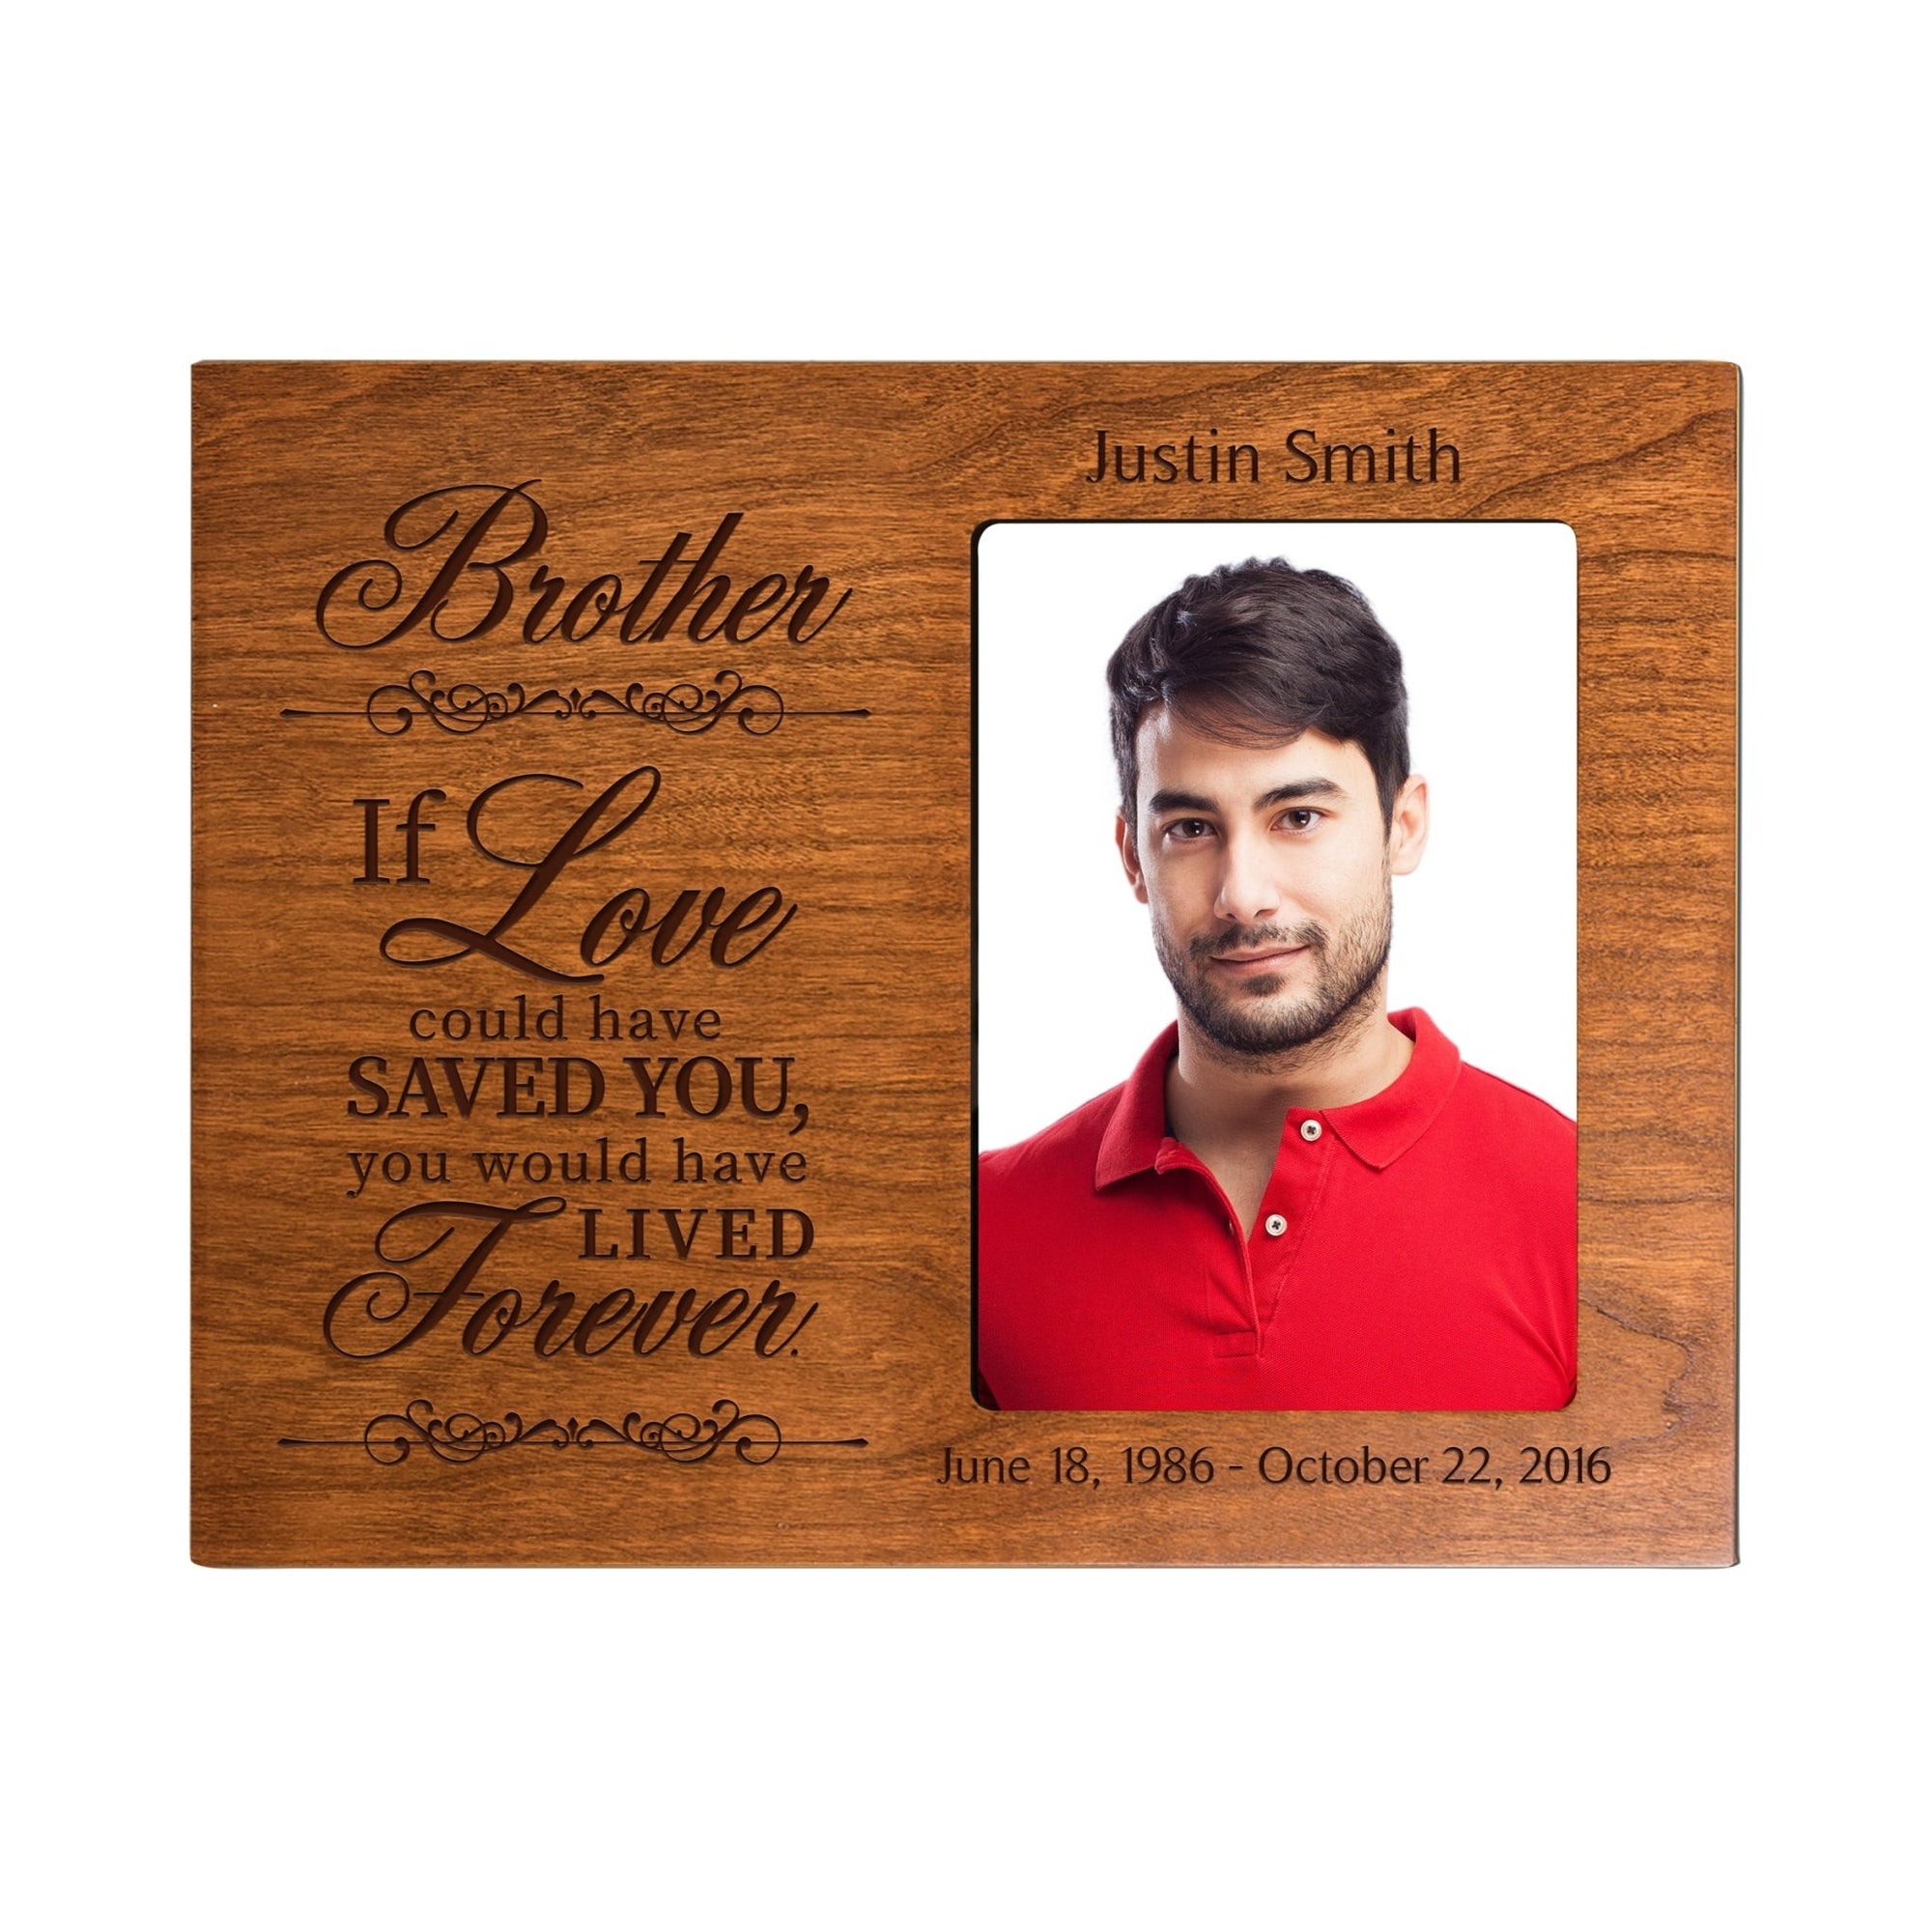 Personalized Wooden Memorial 8x10 Picture Frame holds 4x6 photo Brother, If Love Could - LifeSong Milestones